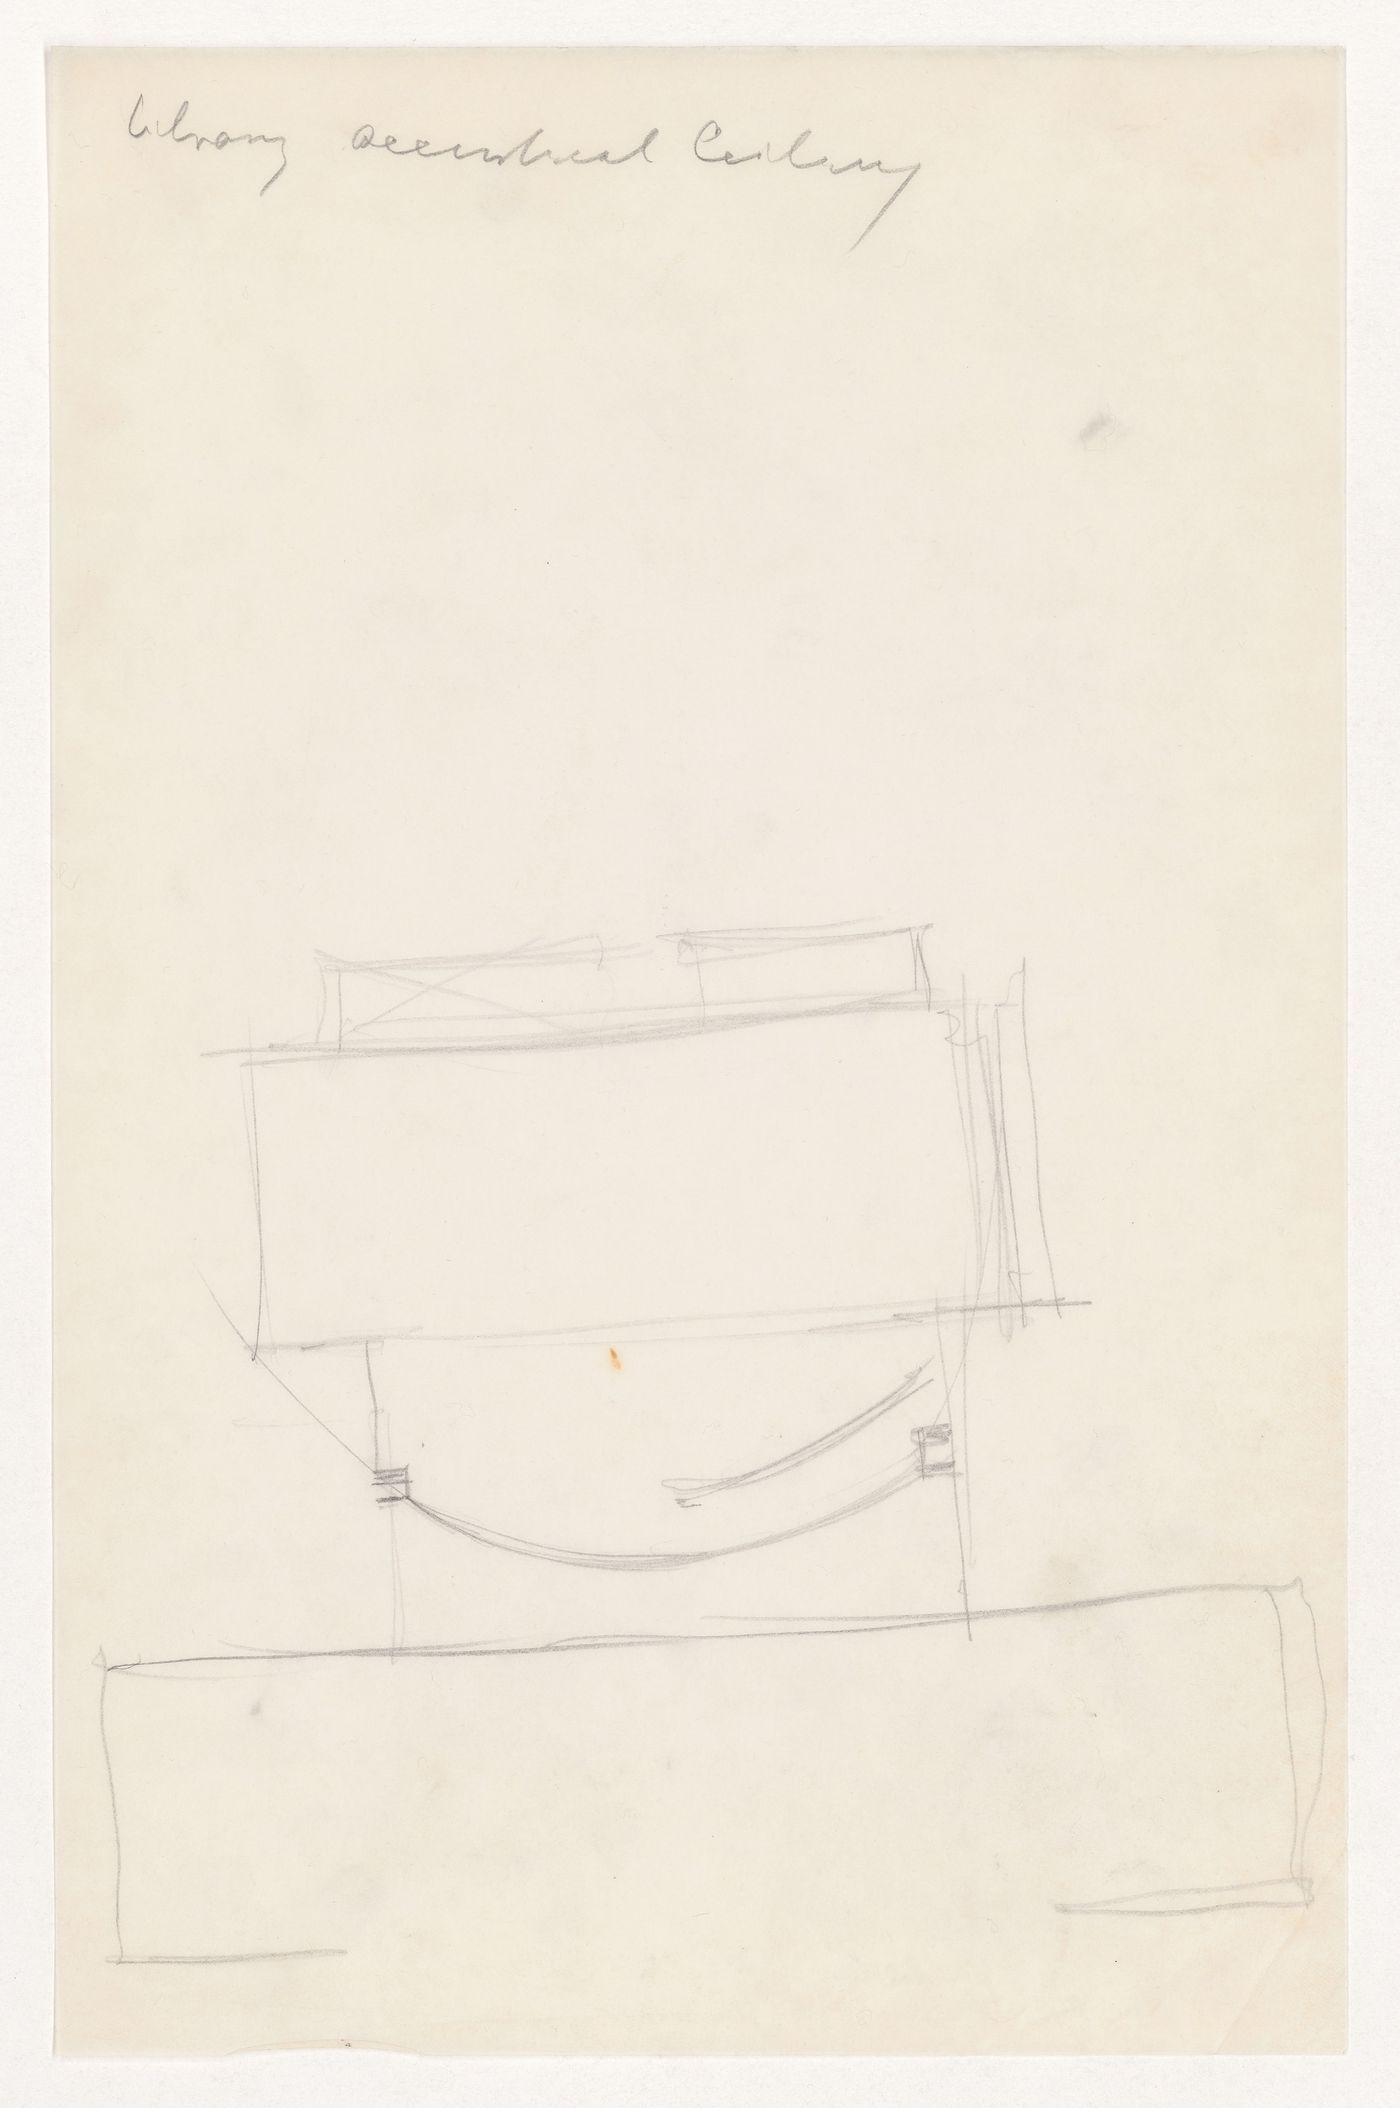 Sketch sectional detail, possibly for a resonator for the Metallurgy Building, Illinois Institute of Technology, Chicago